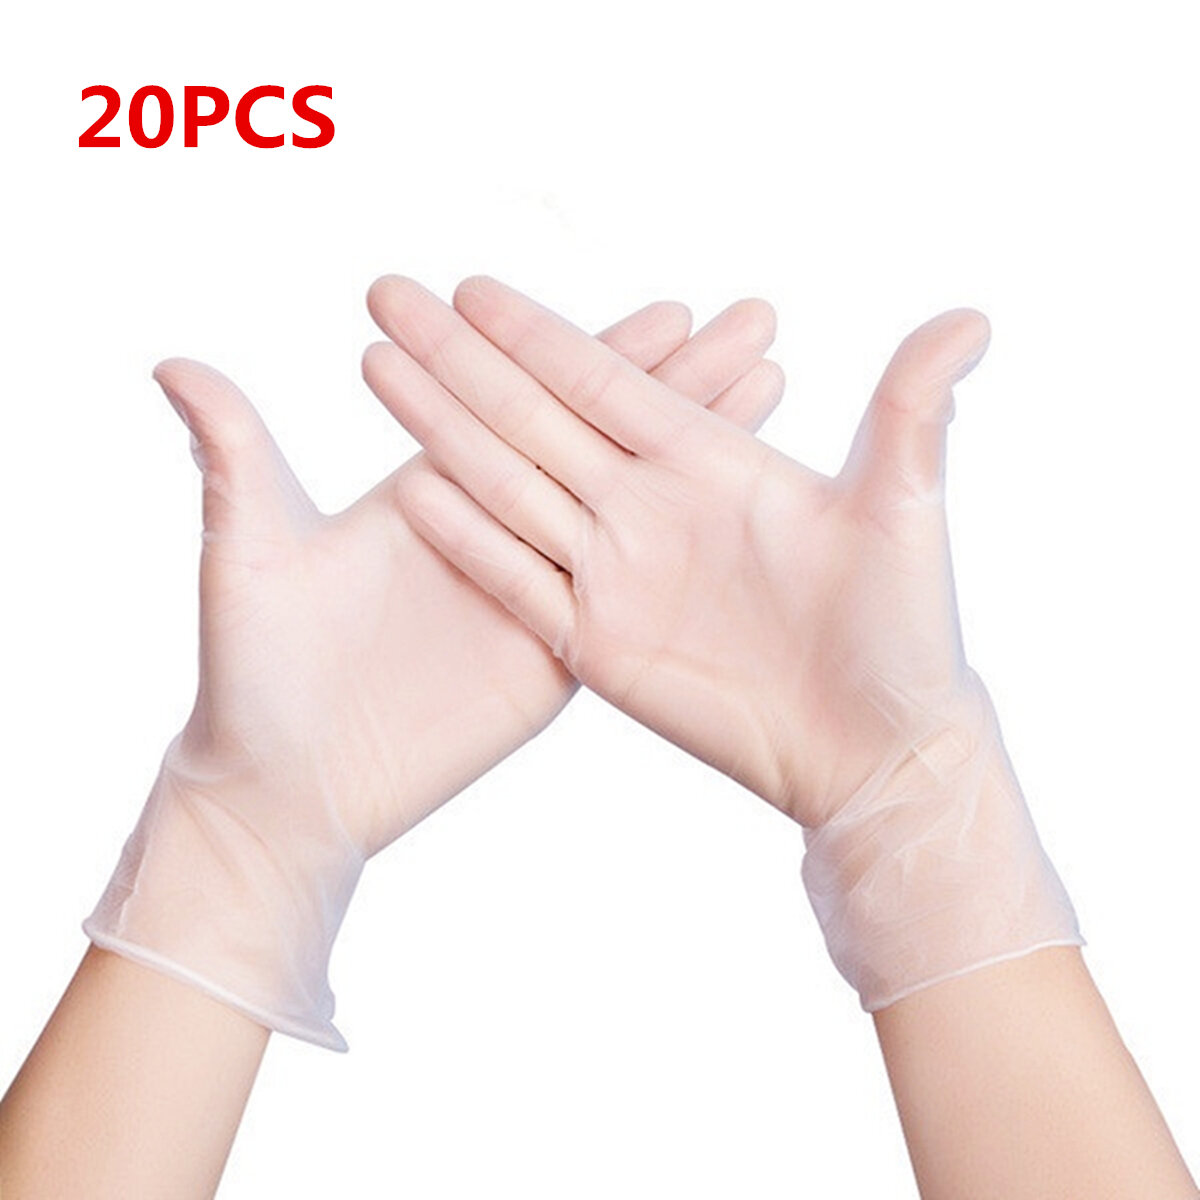 MIANDASHI 20*Pcs Disposable PVC BBQ Gloves Waterproof Anti-infection Safety Gloves